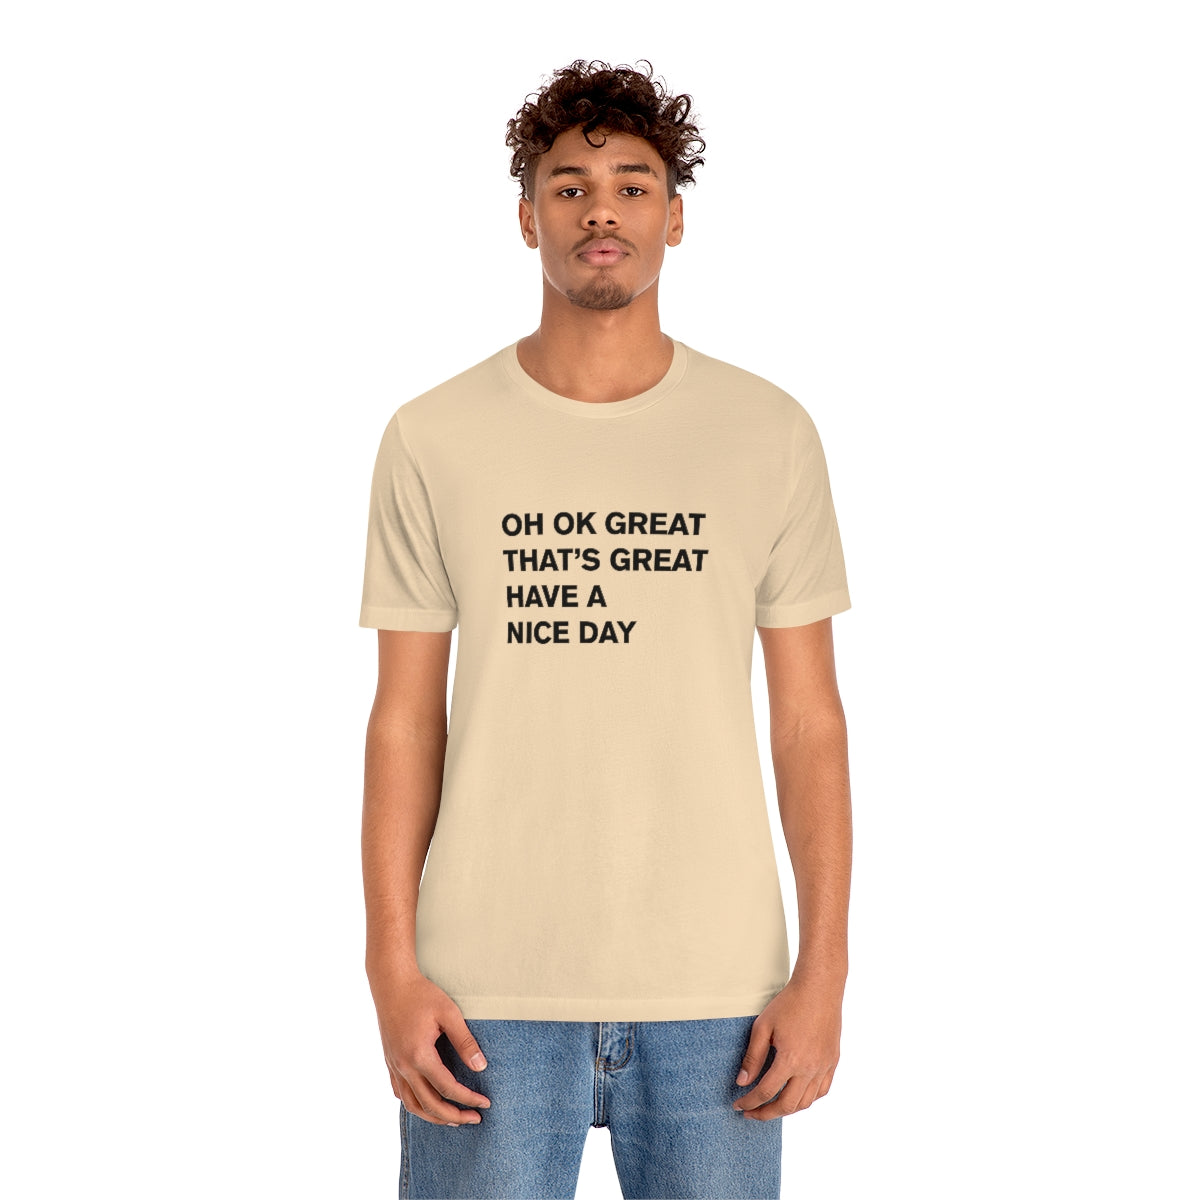 HAVE A NICE DAY - t-shirt